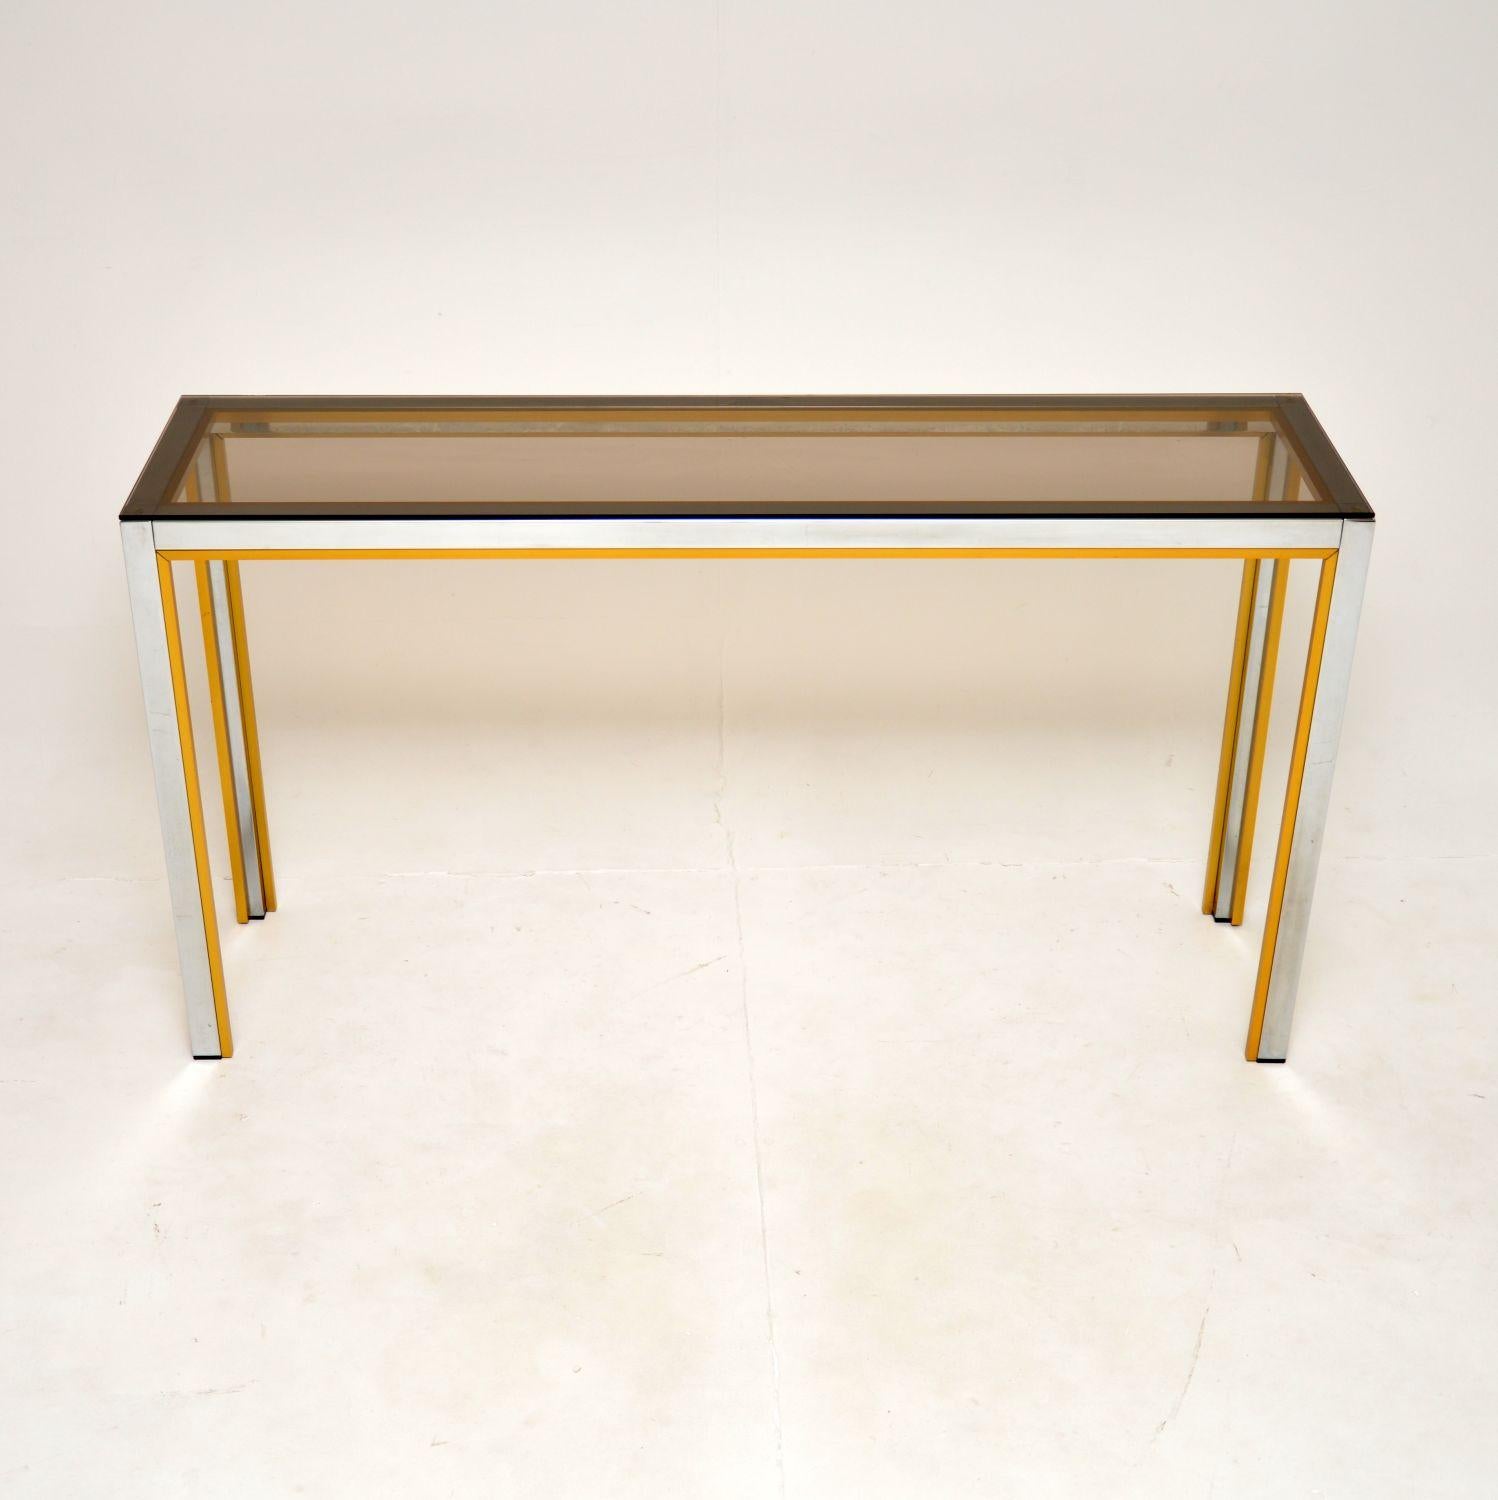 A stylish and very well made vintage Italian chrome console table by Zevi. This was made in Italy in the 1970’s, it was originally retailed by Harrods.

The quality is lovely, this has a gorgeous chrome frame with gold toned aluminium strips on the